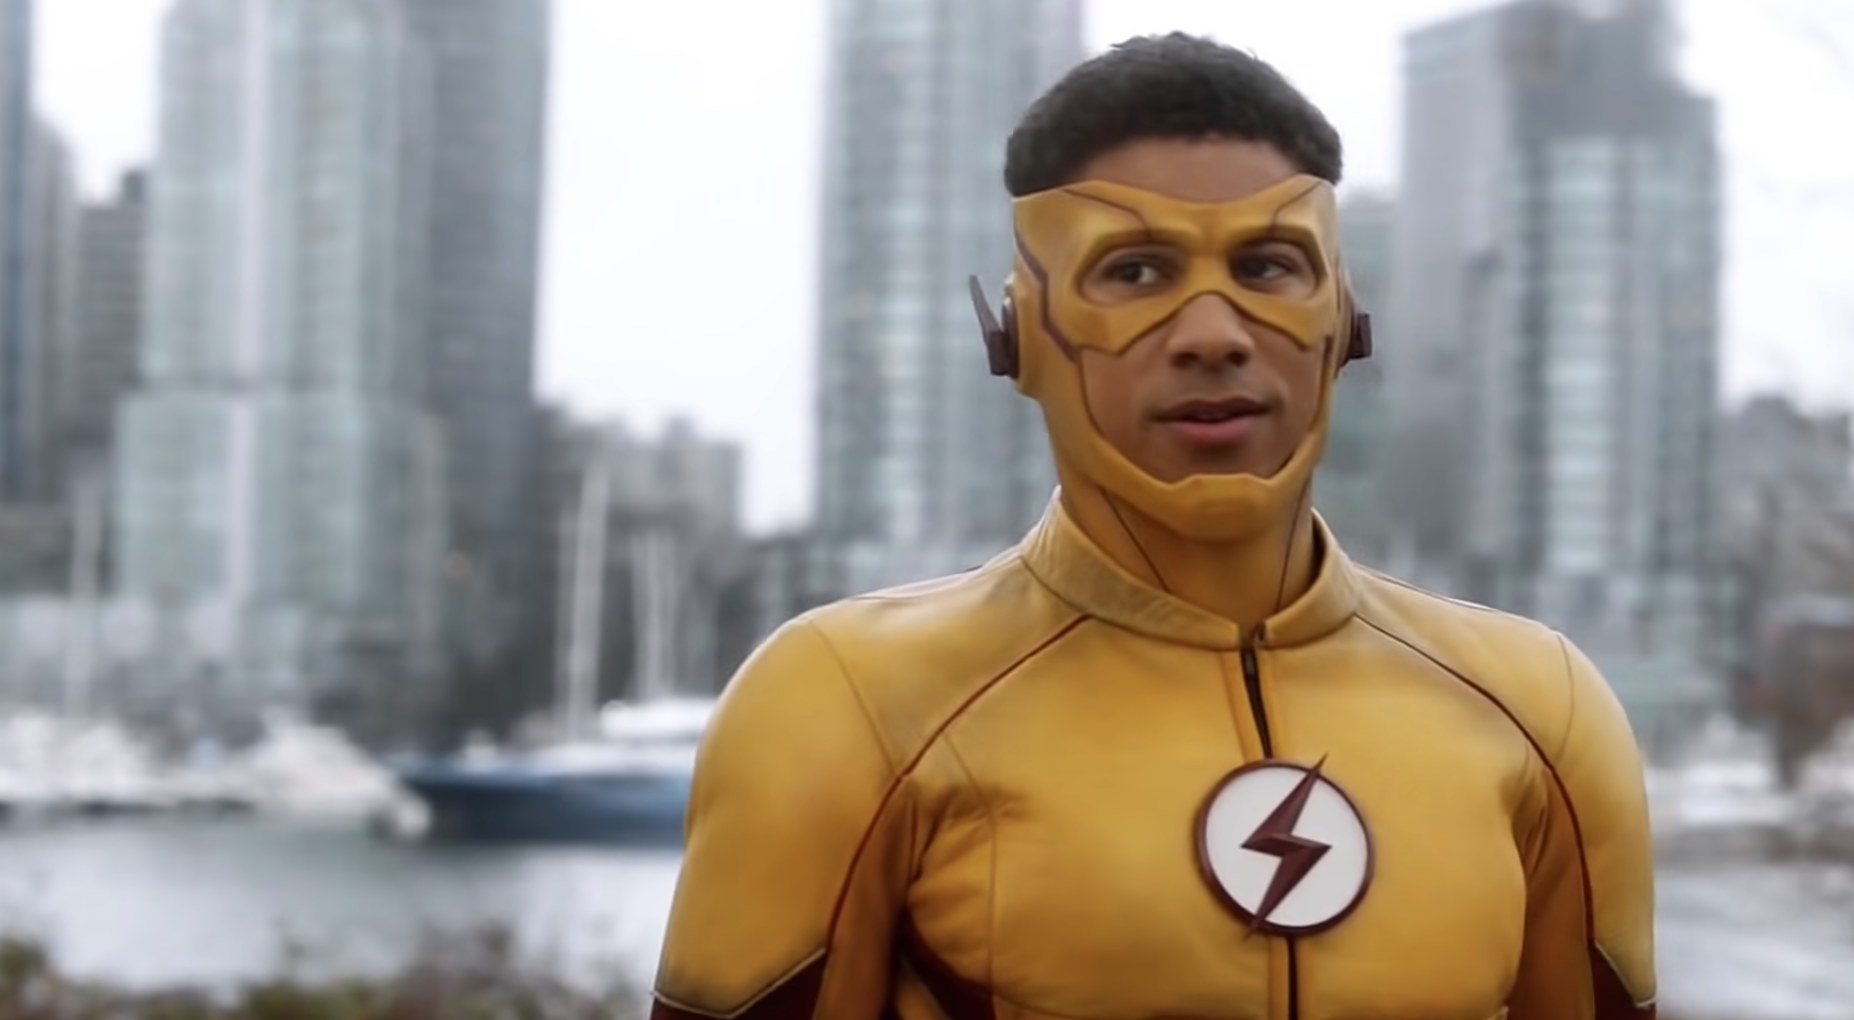 Keiynan Lonsdale as Wally West in The Flash